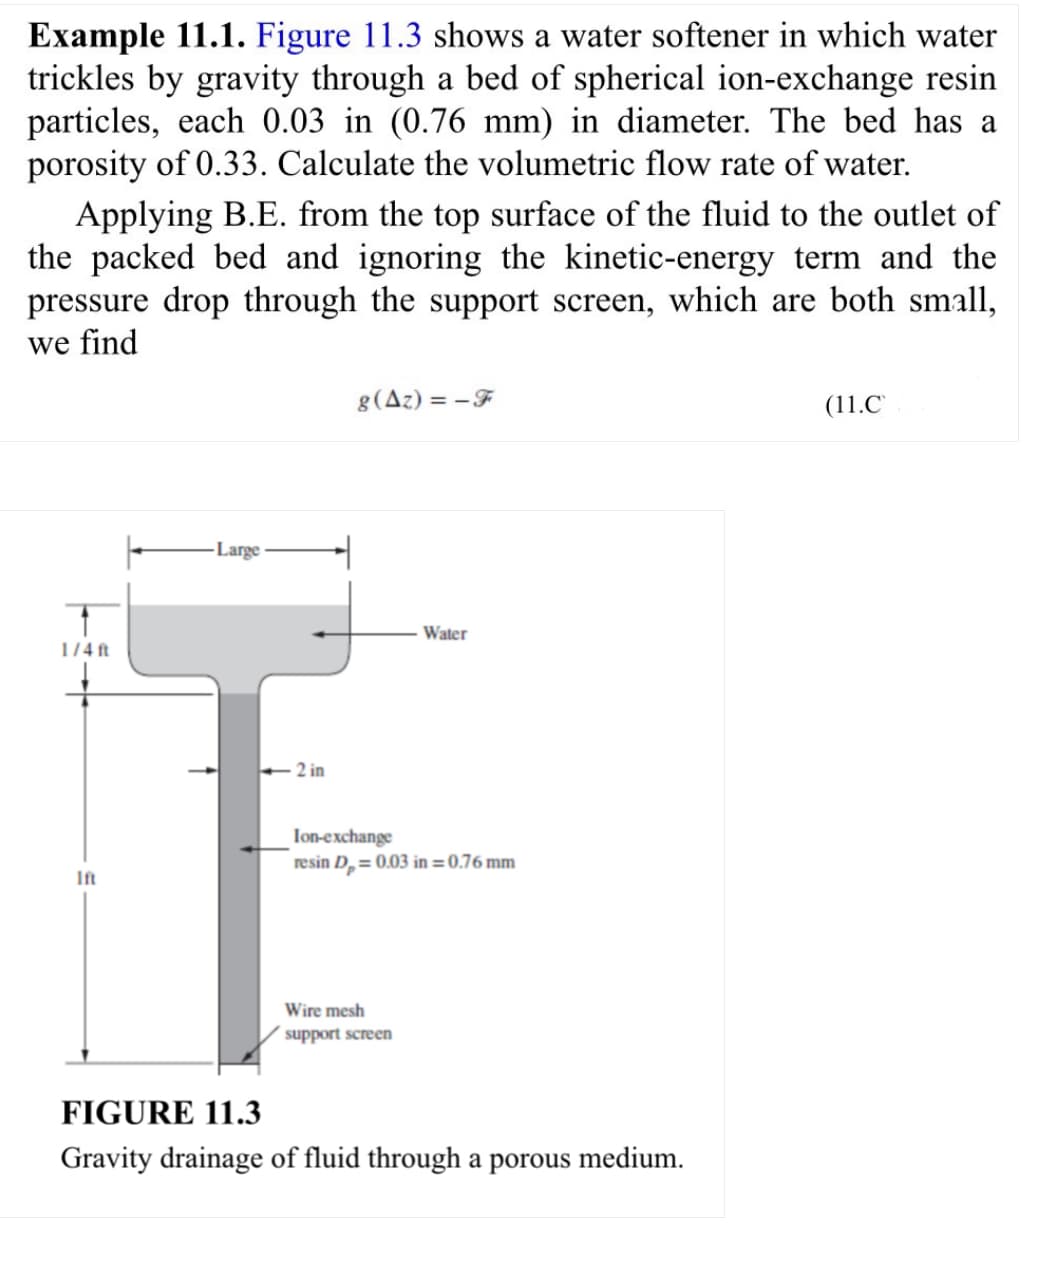 Example 11.1. Figure 11.3 shows a water softener in which water
trickles by gravity through a bed of spherical ion-exchange resin
particles, each 0.03 in (0.76 mm) in diameter. The bed has a
porosity of 0.33. Calculate the volumetric flow rate of water.
Applying B.E. from the top surface of the fluid to the outlet of
the packed bed and ignoring the kinetic-energy term and the
pressure drop through the support screen, which are both small,
we find
1/4 ft
Ift
Large
<-2 in
g(Az)=-F
Water
Ion-exchange
resin D₂ = 0.03 in = 0.76 mm
Wire mesh
support screen
FIGURE 11.3
Gravity drainage of fluid through a porous medium.
(11.C